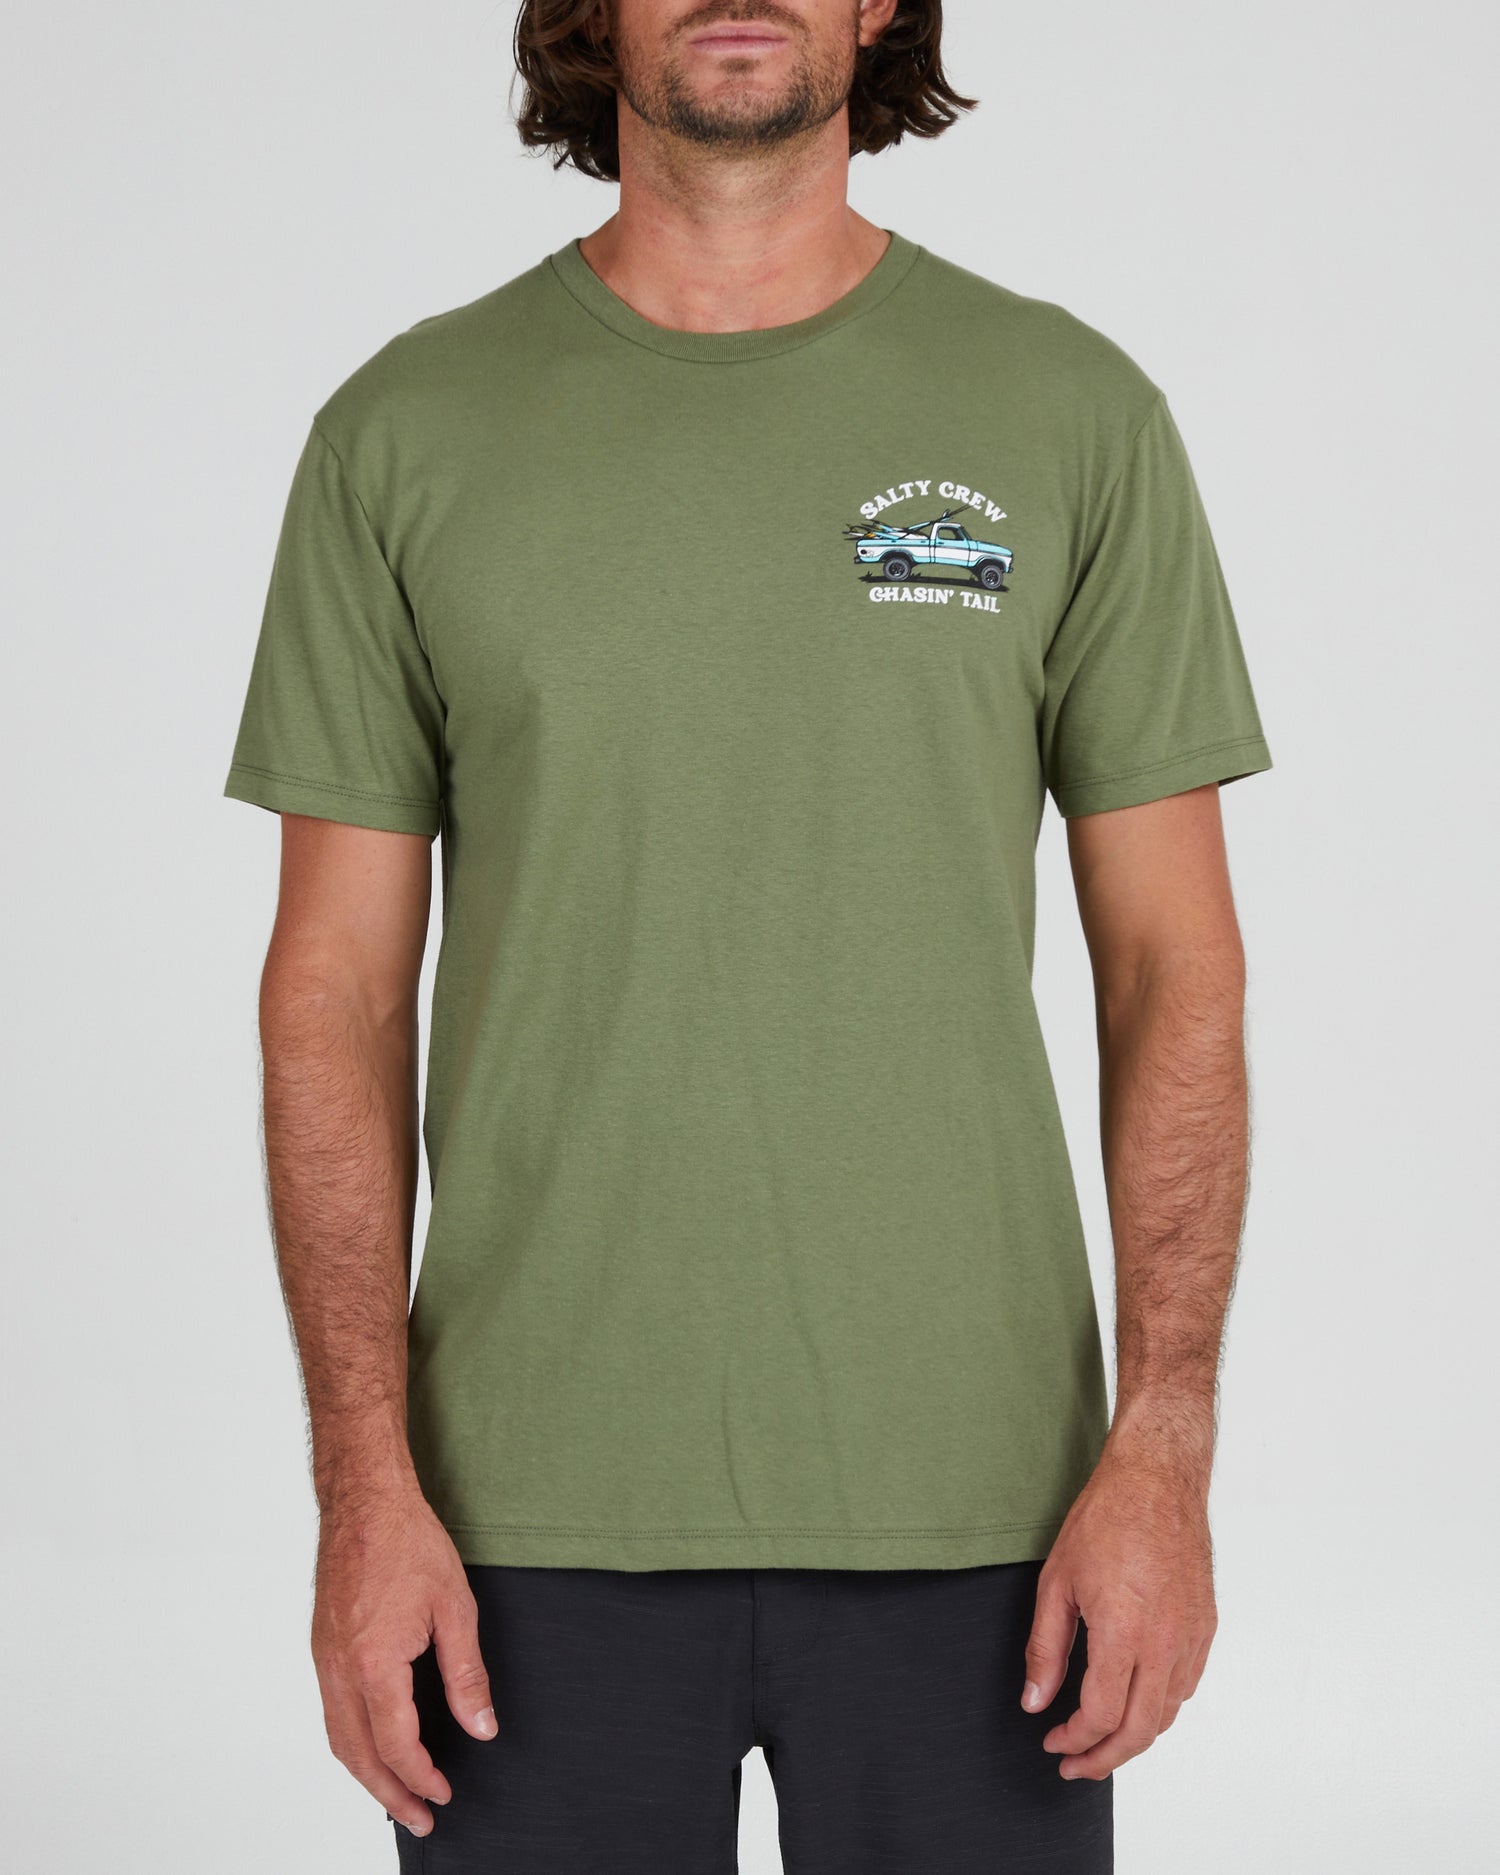 On body front of the Off Road Sage Green S/S Premium Tee